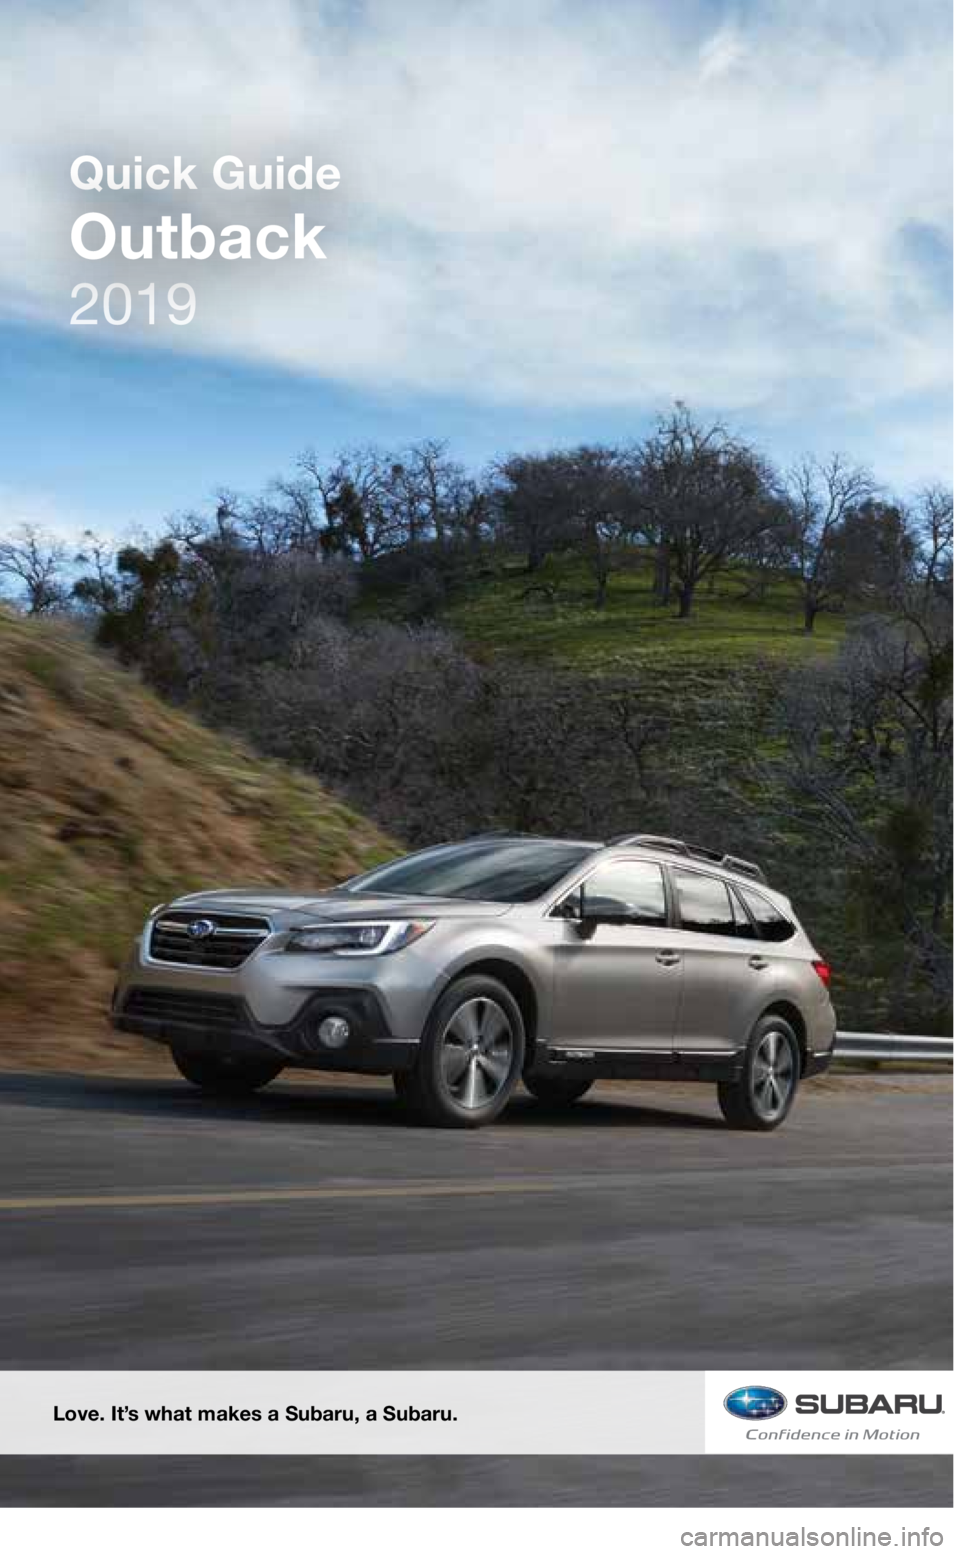 SUBARU OUTBACK 2019  Quick Guide Love. It’s what makes a Subaru, a Subaru.
Quick Guide
Outback
3645633_19b_Subaru_Outback_QG_081418.indd   28/14/18   1:50 PM 
2019     